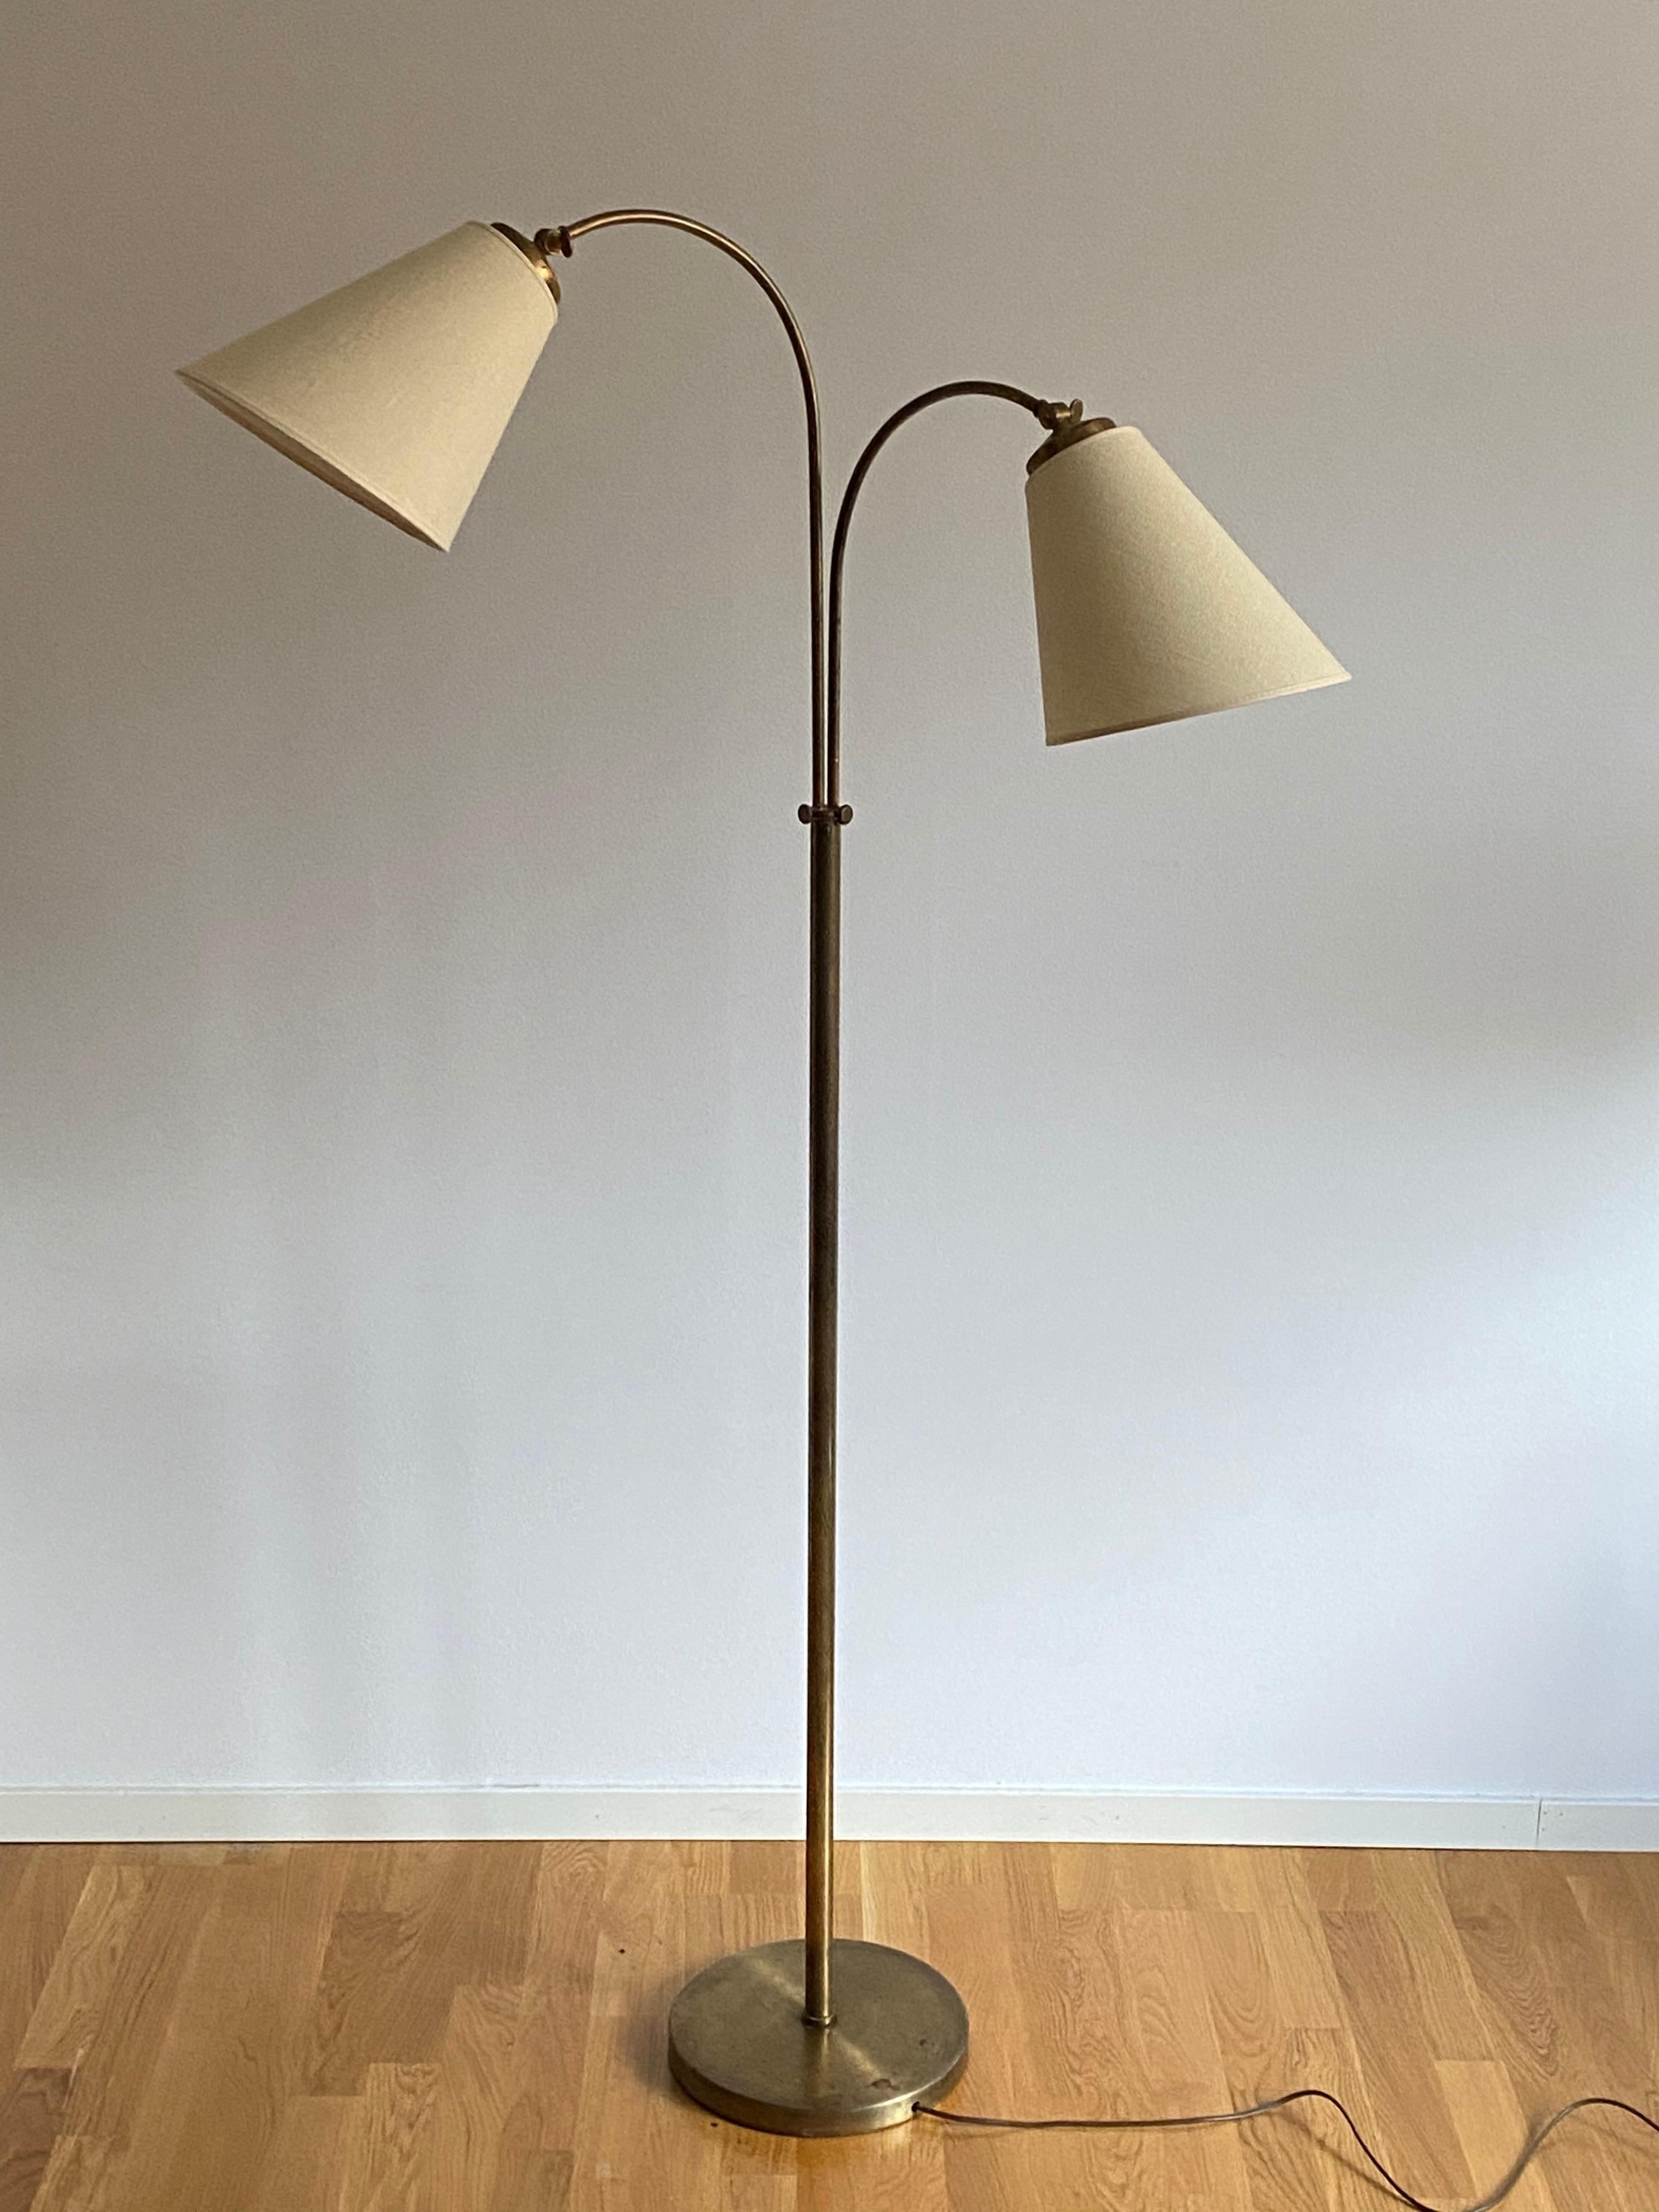 An adjustable two-armed functionalist floor lamp. With adjustable arms. Brand new Swedish made lampshades.

Dimensions variable. 

Other designers of the period include Josef Frank, Paavo Tynell, Hans Agne Jacobsen, and Alvar Aalto.